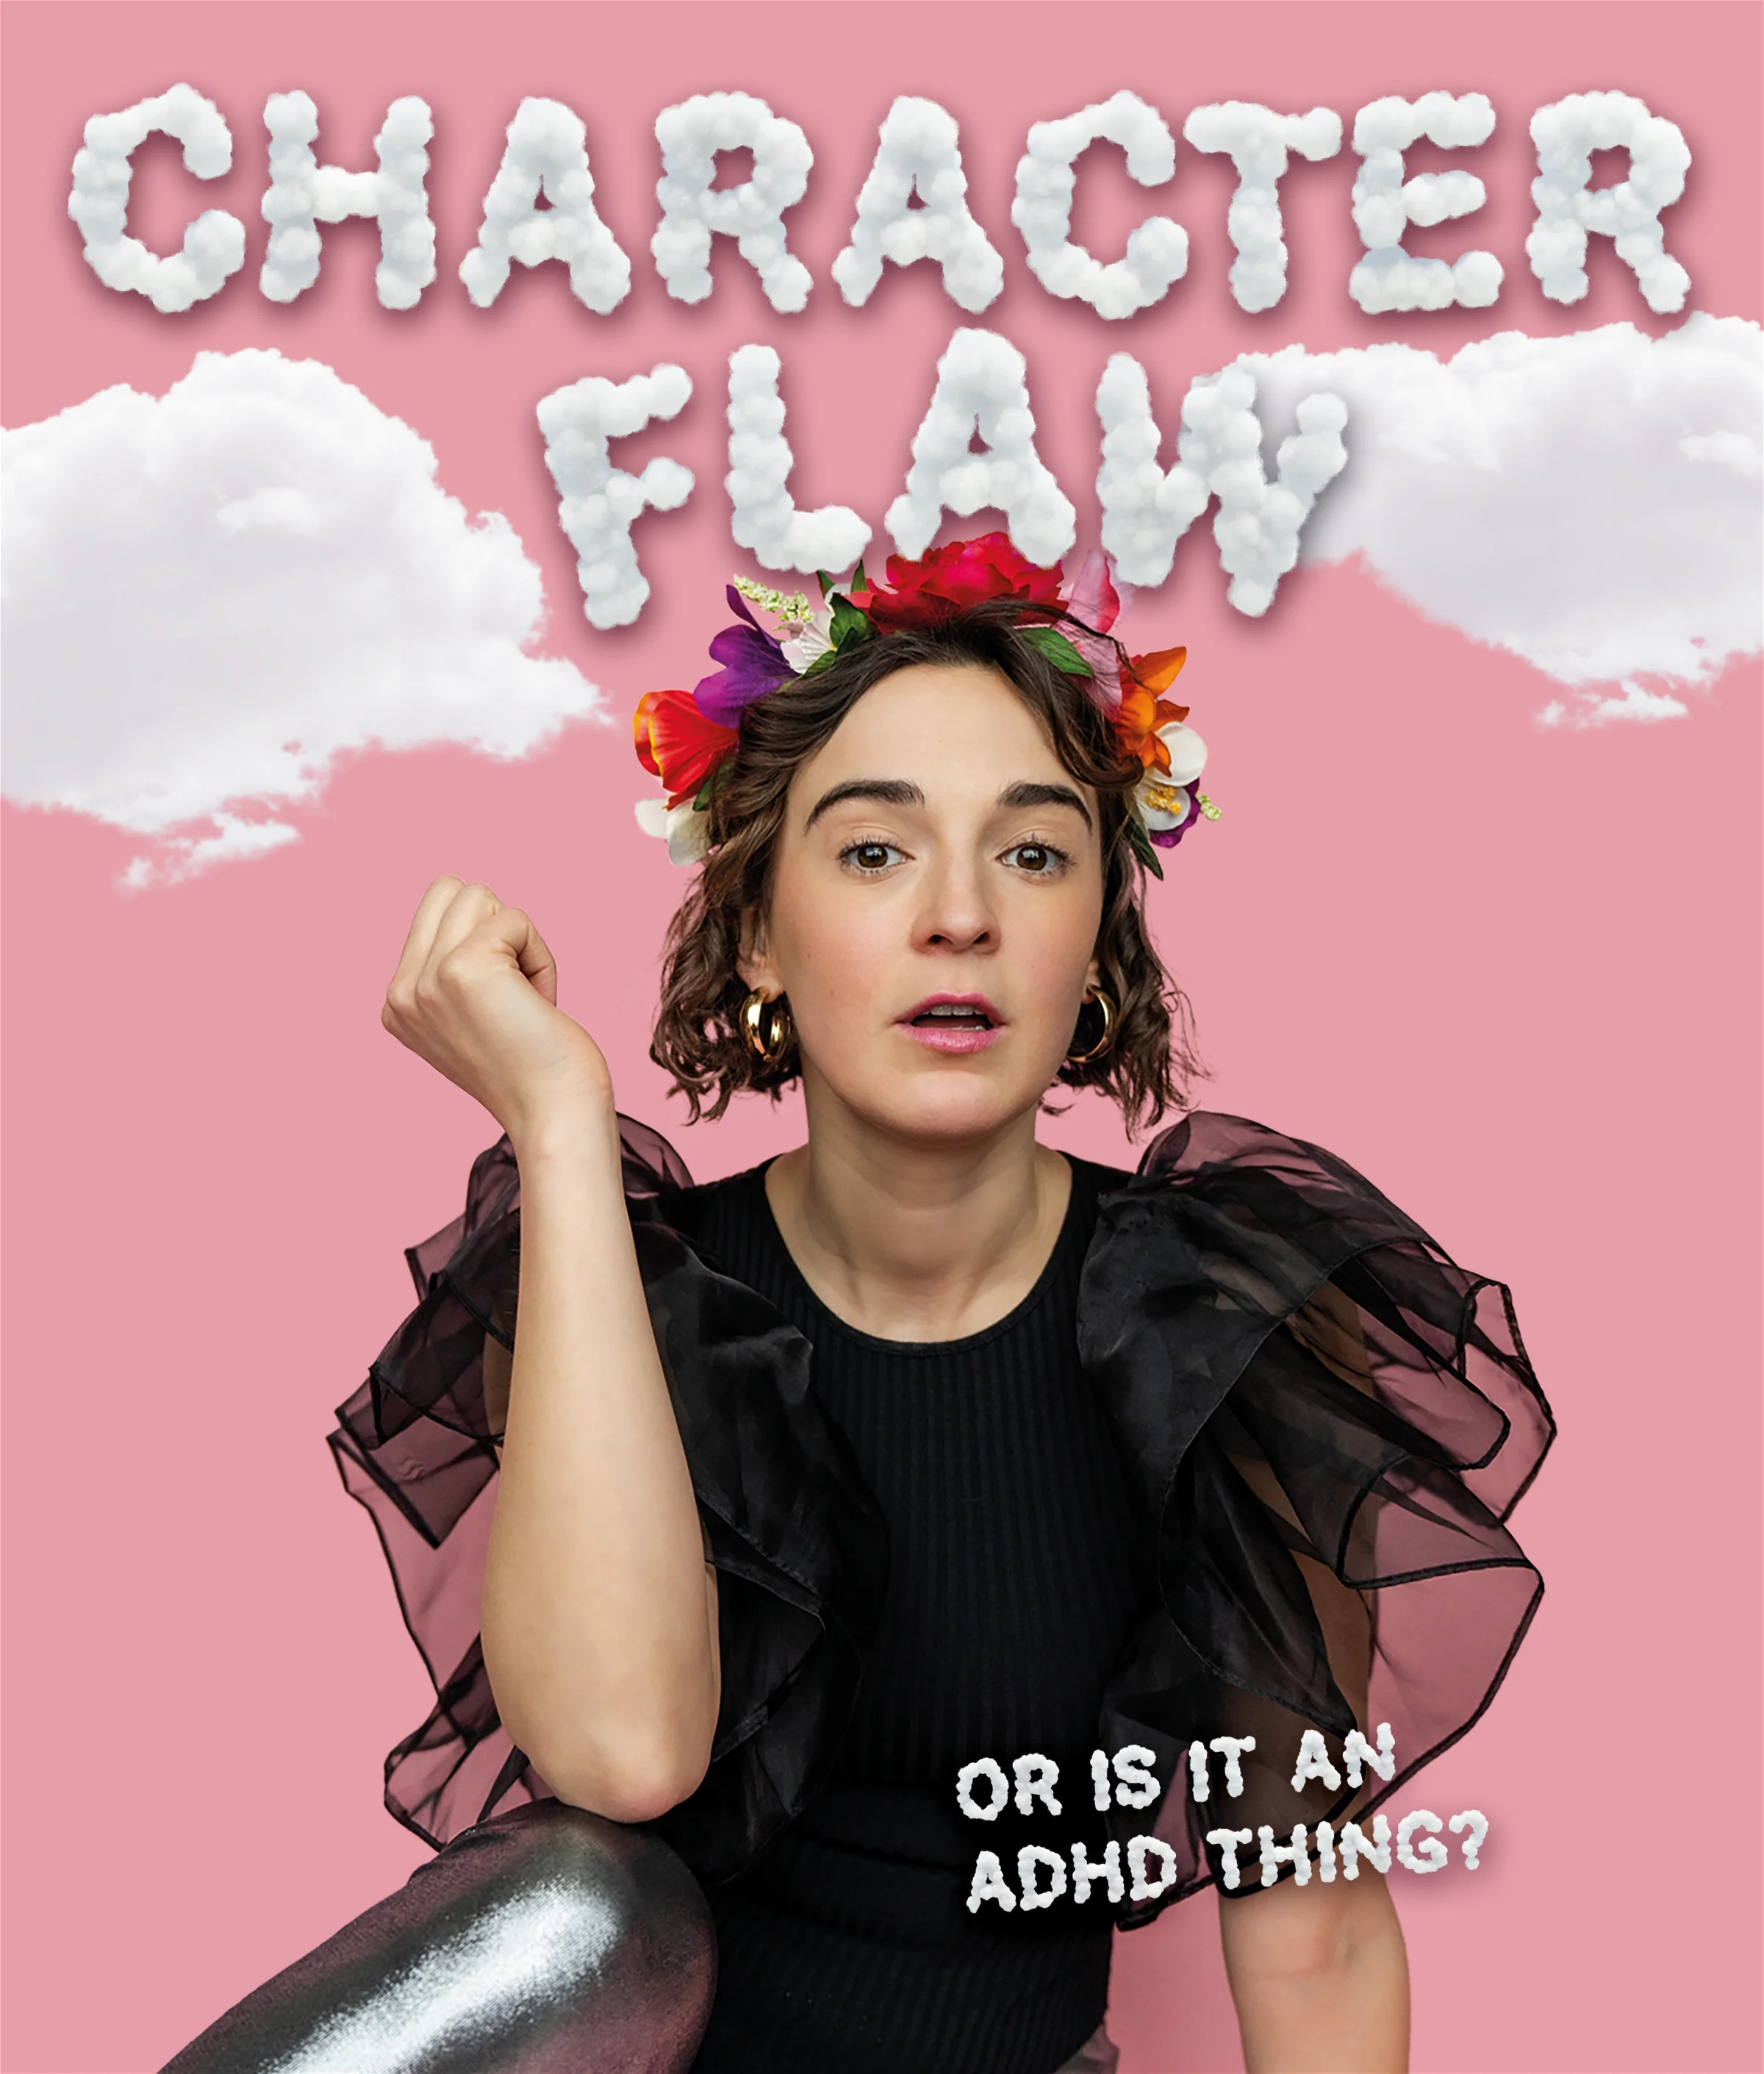 Philippa in a black dress with flowers in her hair against a pink background surrounded by clowds with the text Character Flaw and then Or is it an ADHD thing?